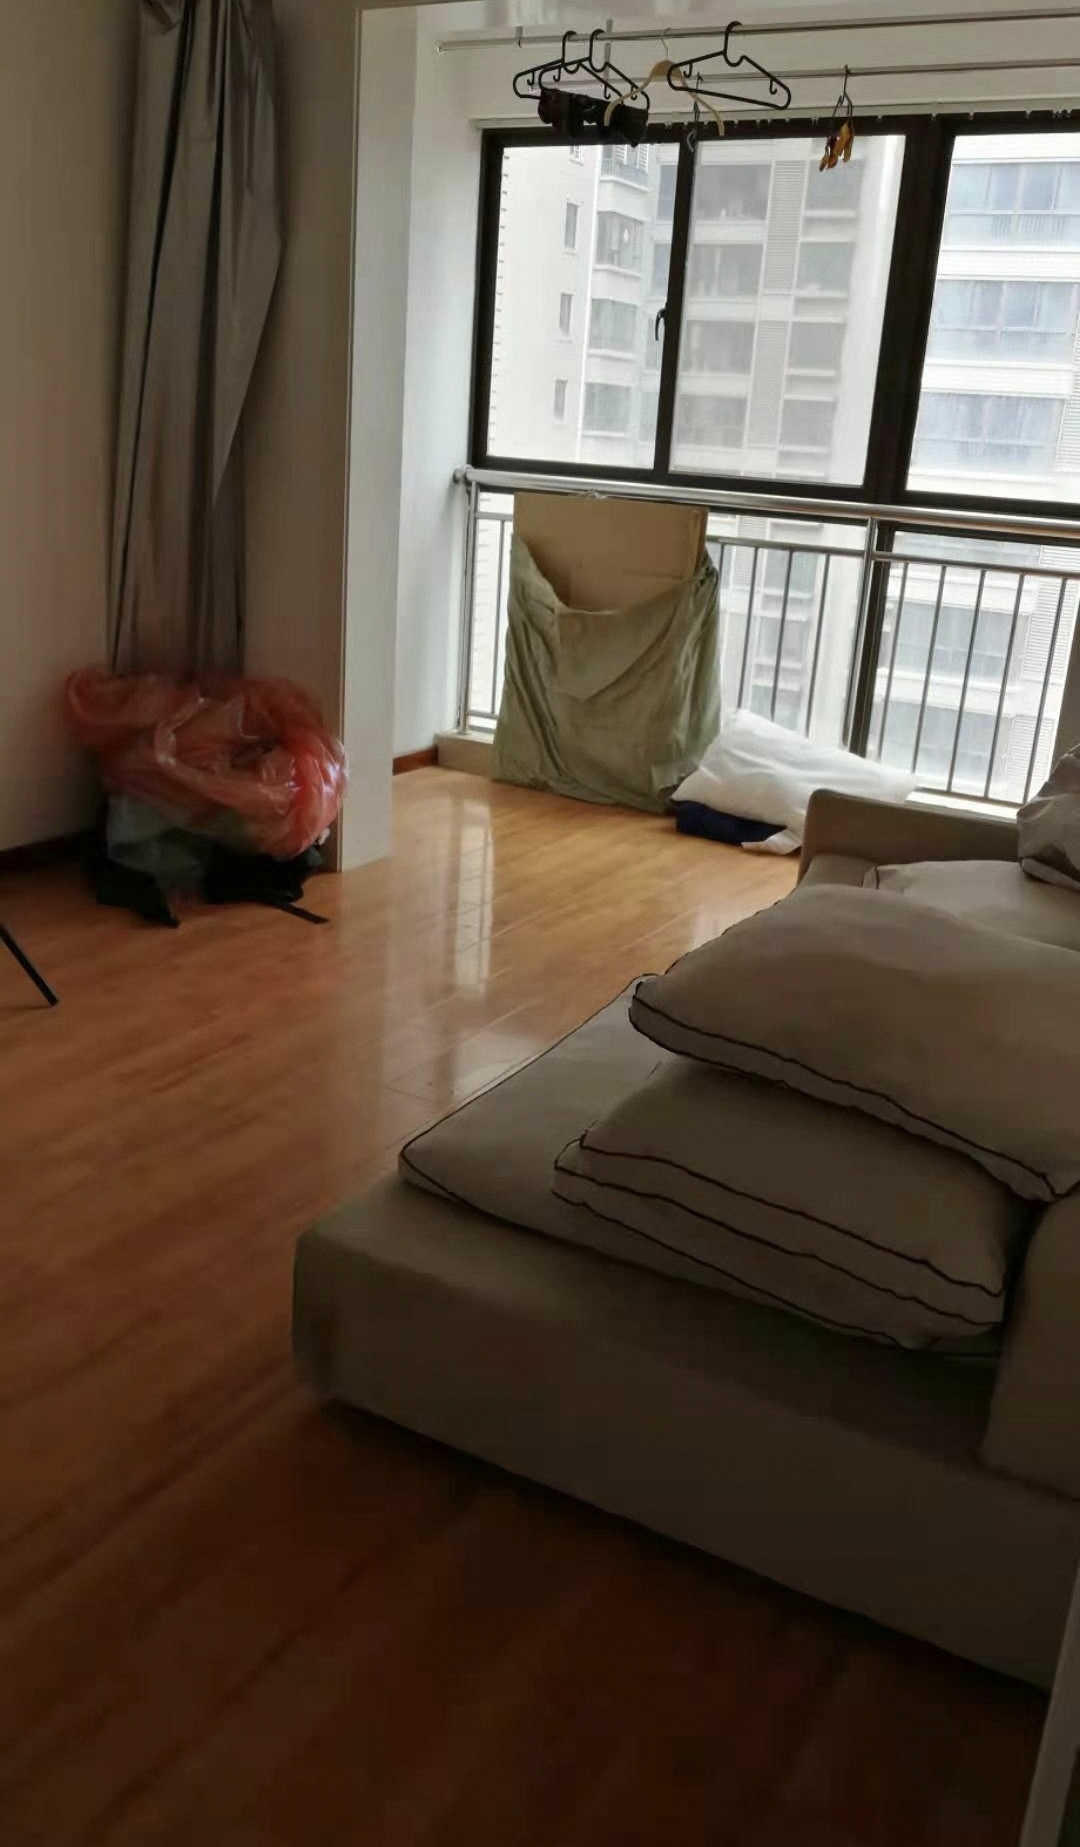 Xi'An-Changan-60RMB/Night,Cozy Home,Clean&Comfy,No Gender Limit,Hustle & Bustle,“Friends”,Chilled